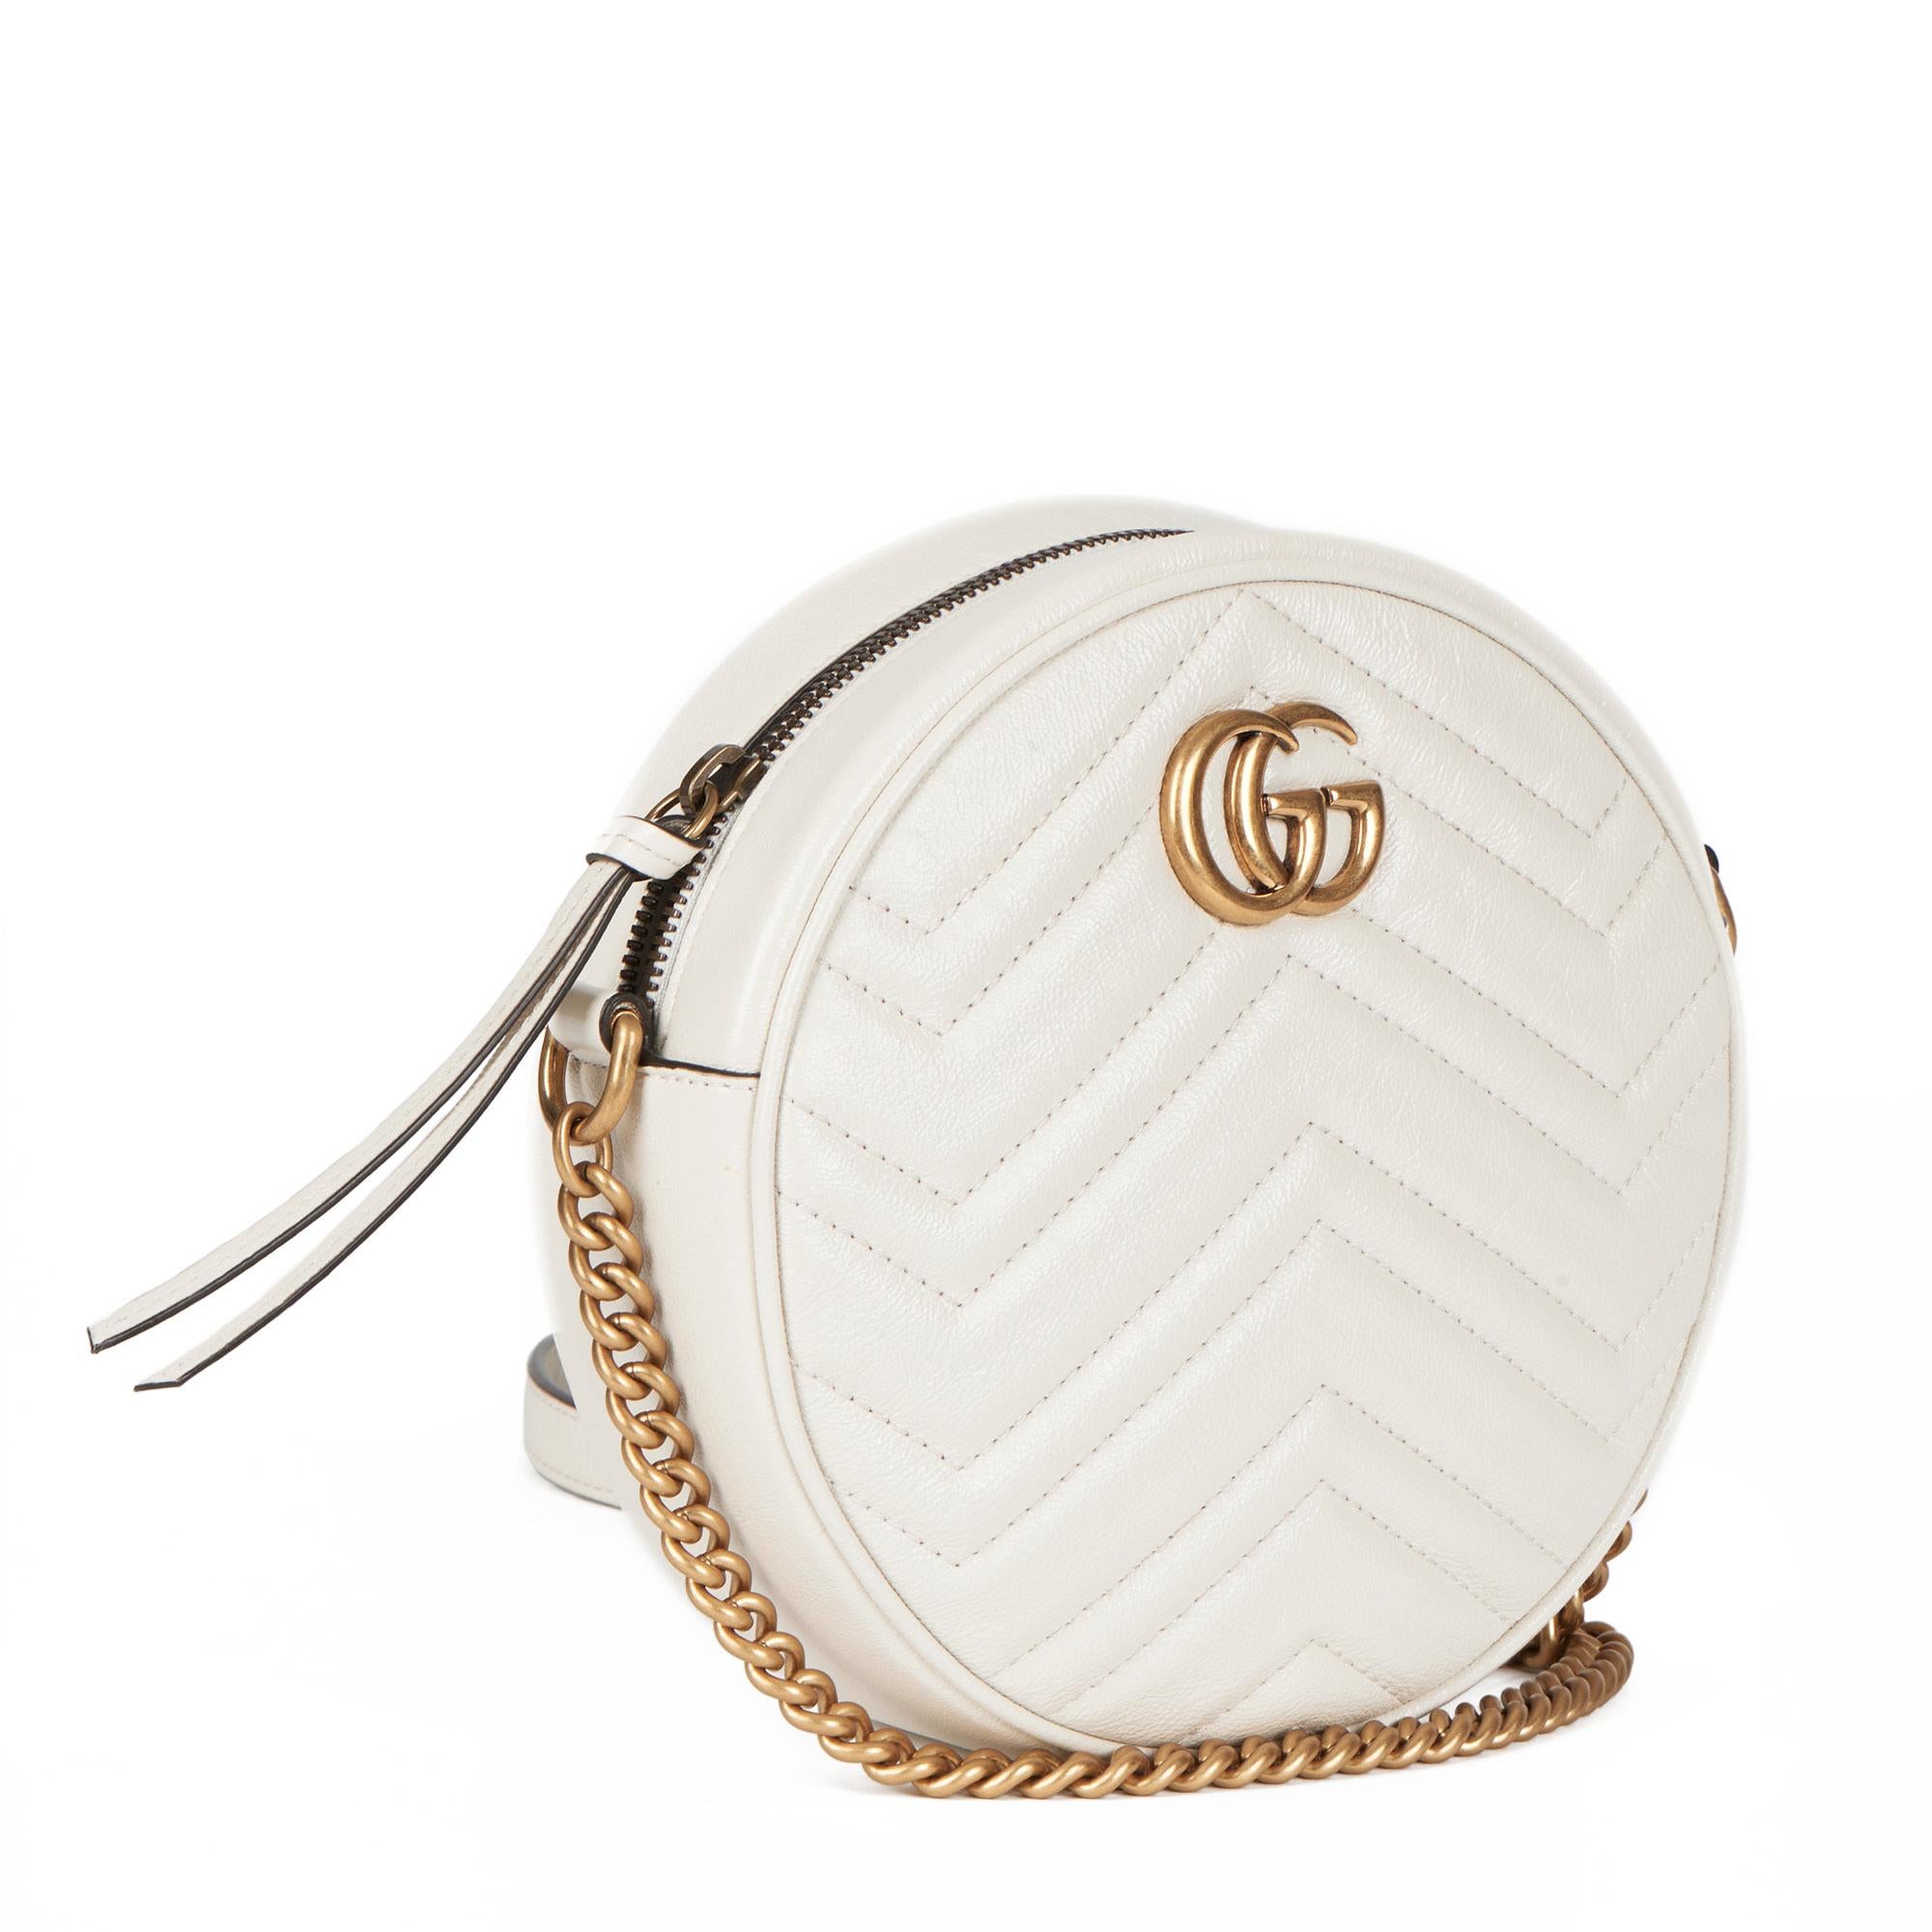 GUCCI
Ivory Chevron Quilted Shiny Calfskin Leather Mini Round Marmont

Xupes Reference: CB378
Serial Number: 550154 493075
Age (Circa): 2021
Accompanied By: Gucci Dust Bag
Authenticity Details: Date Stamp (Made in Italy)
Gender: Ladies
Type: